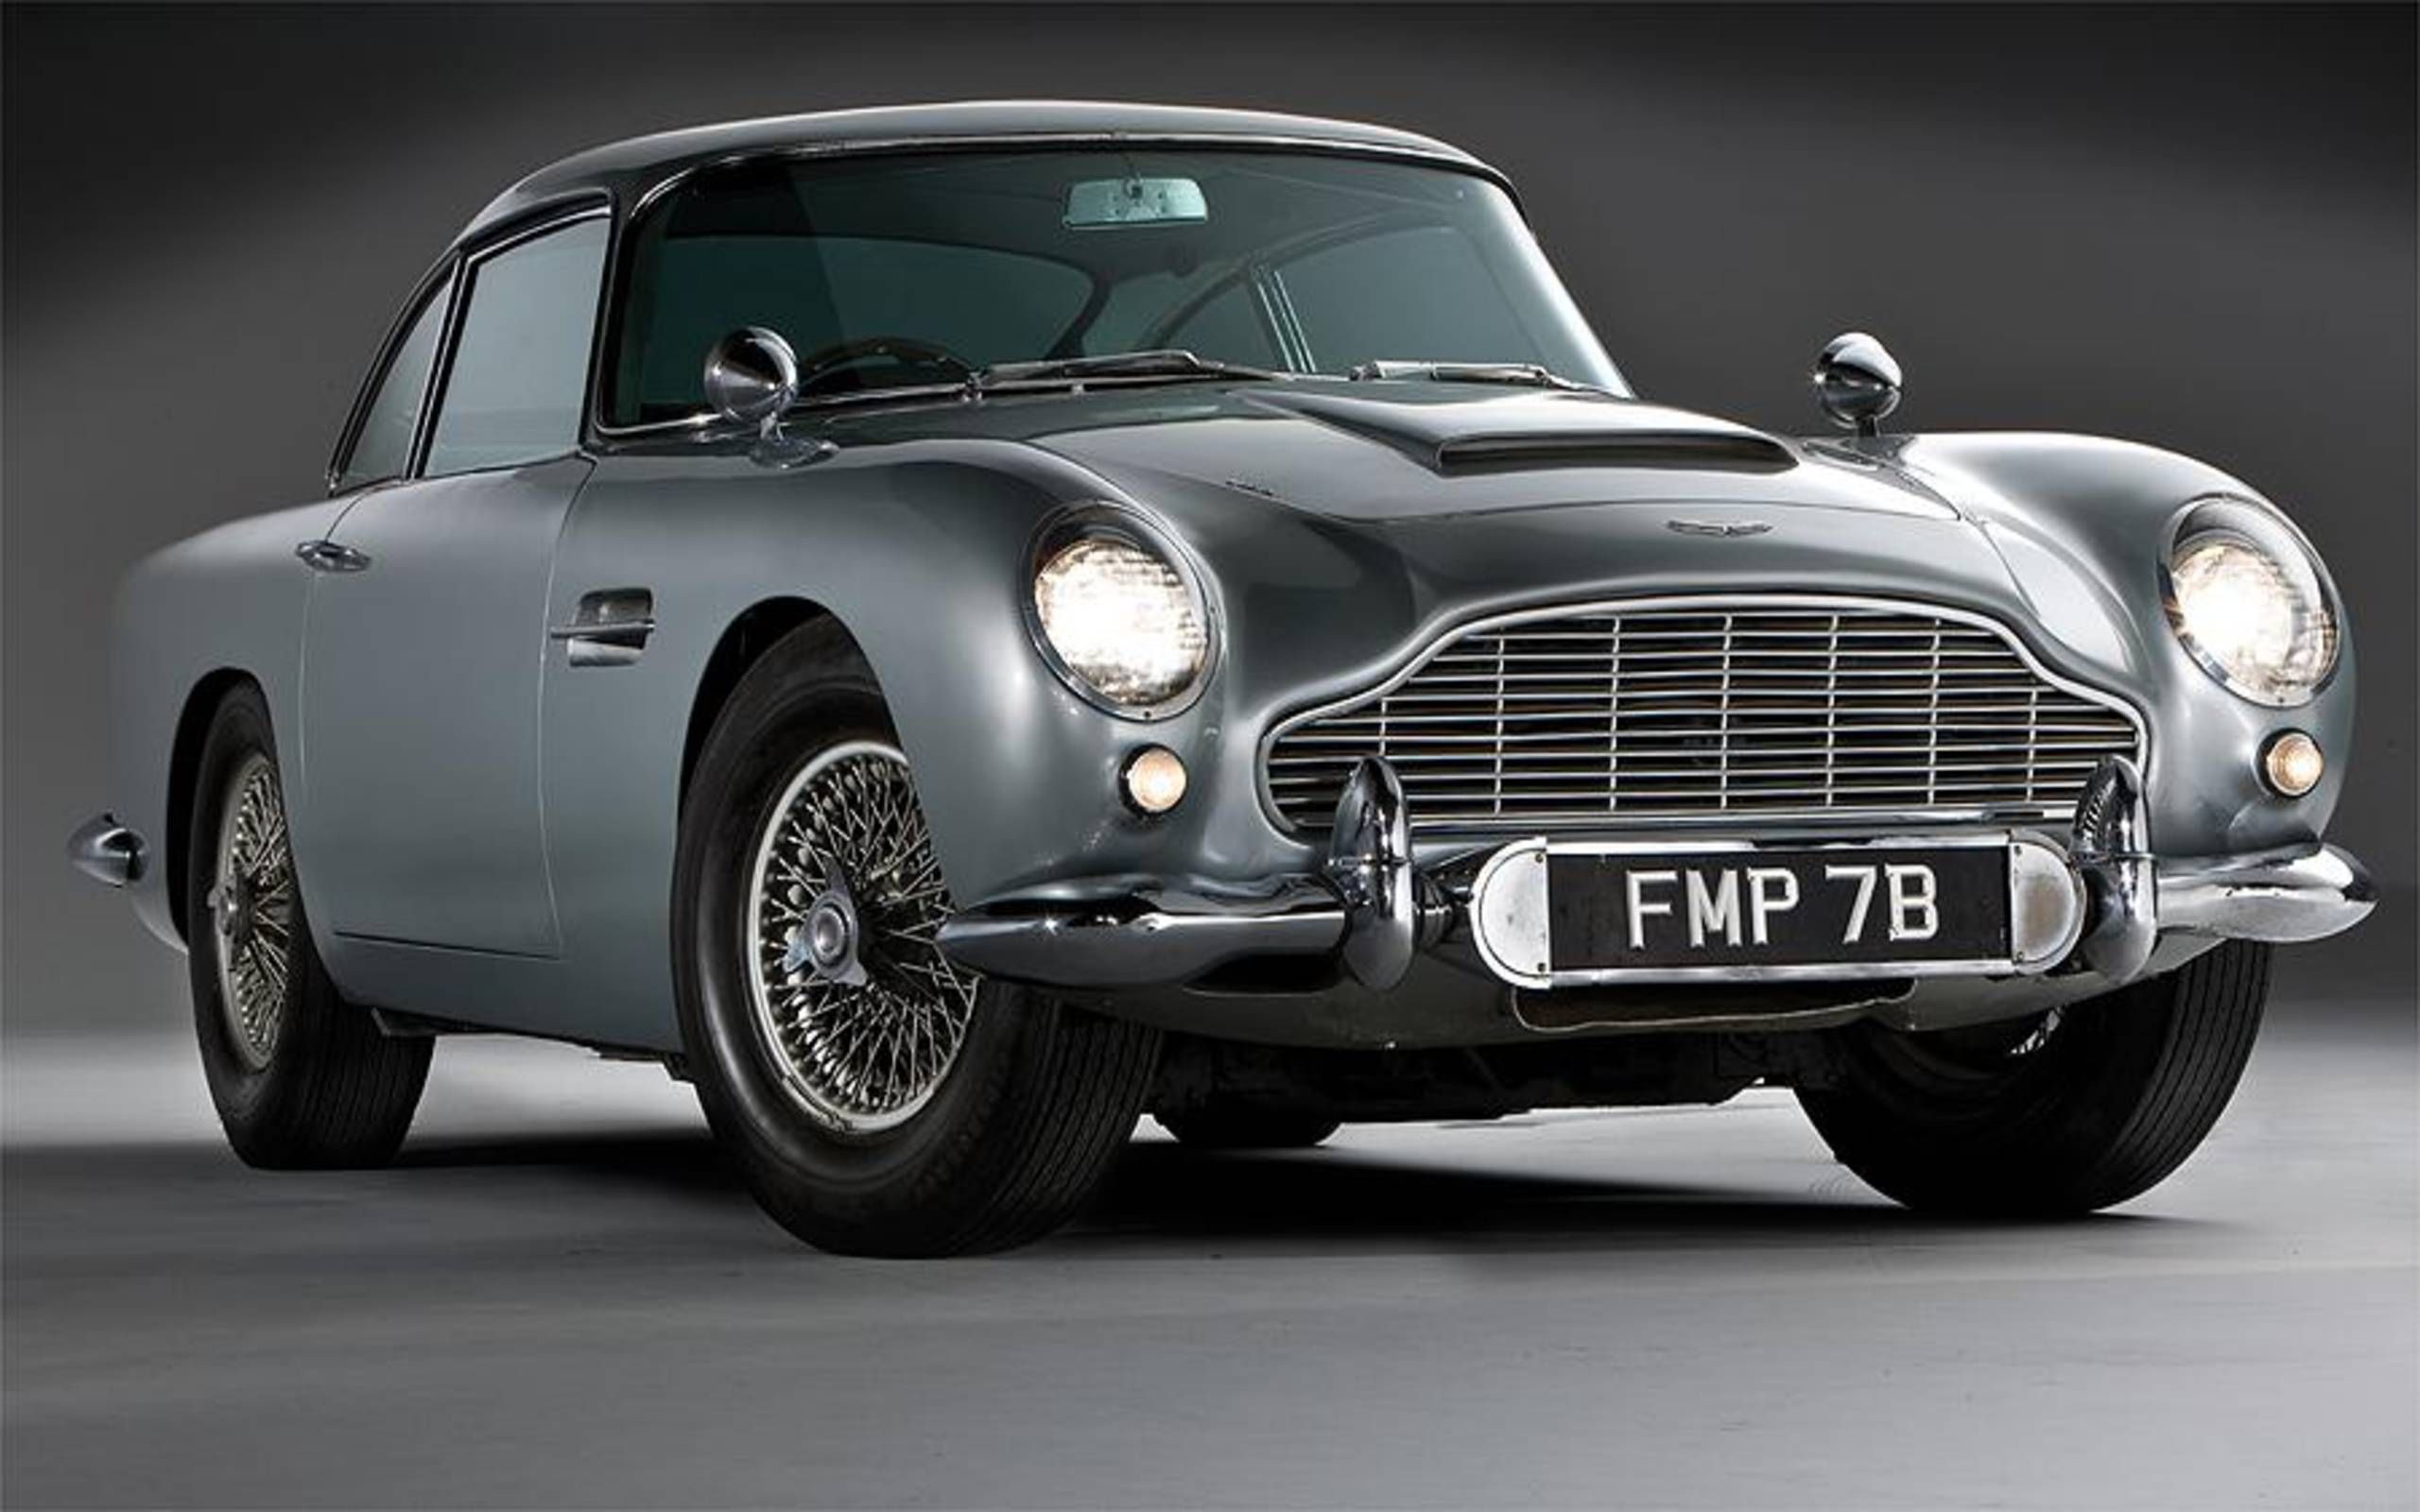 Two James Bond cars head to auction - Old Cars Weekly